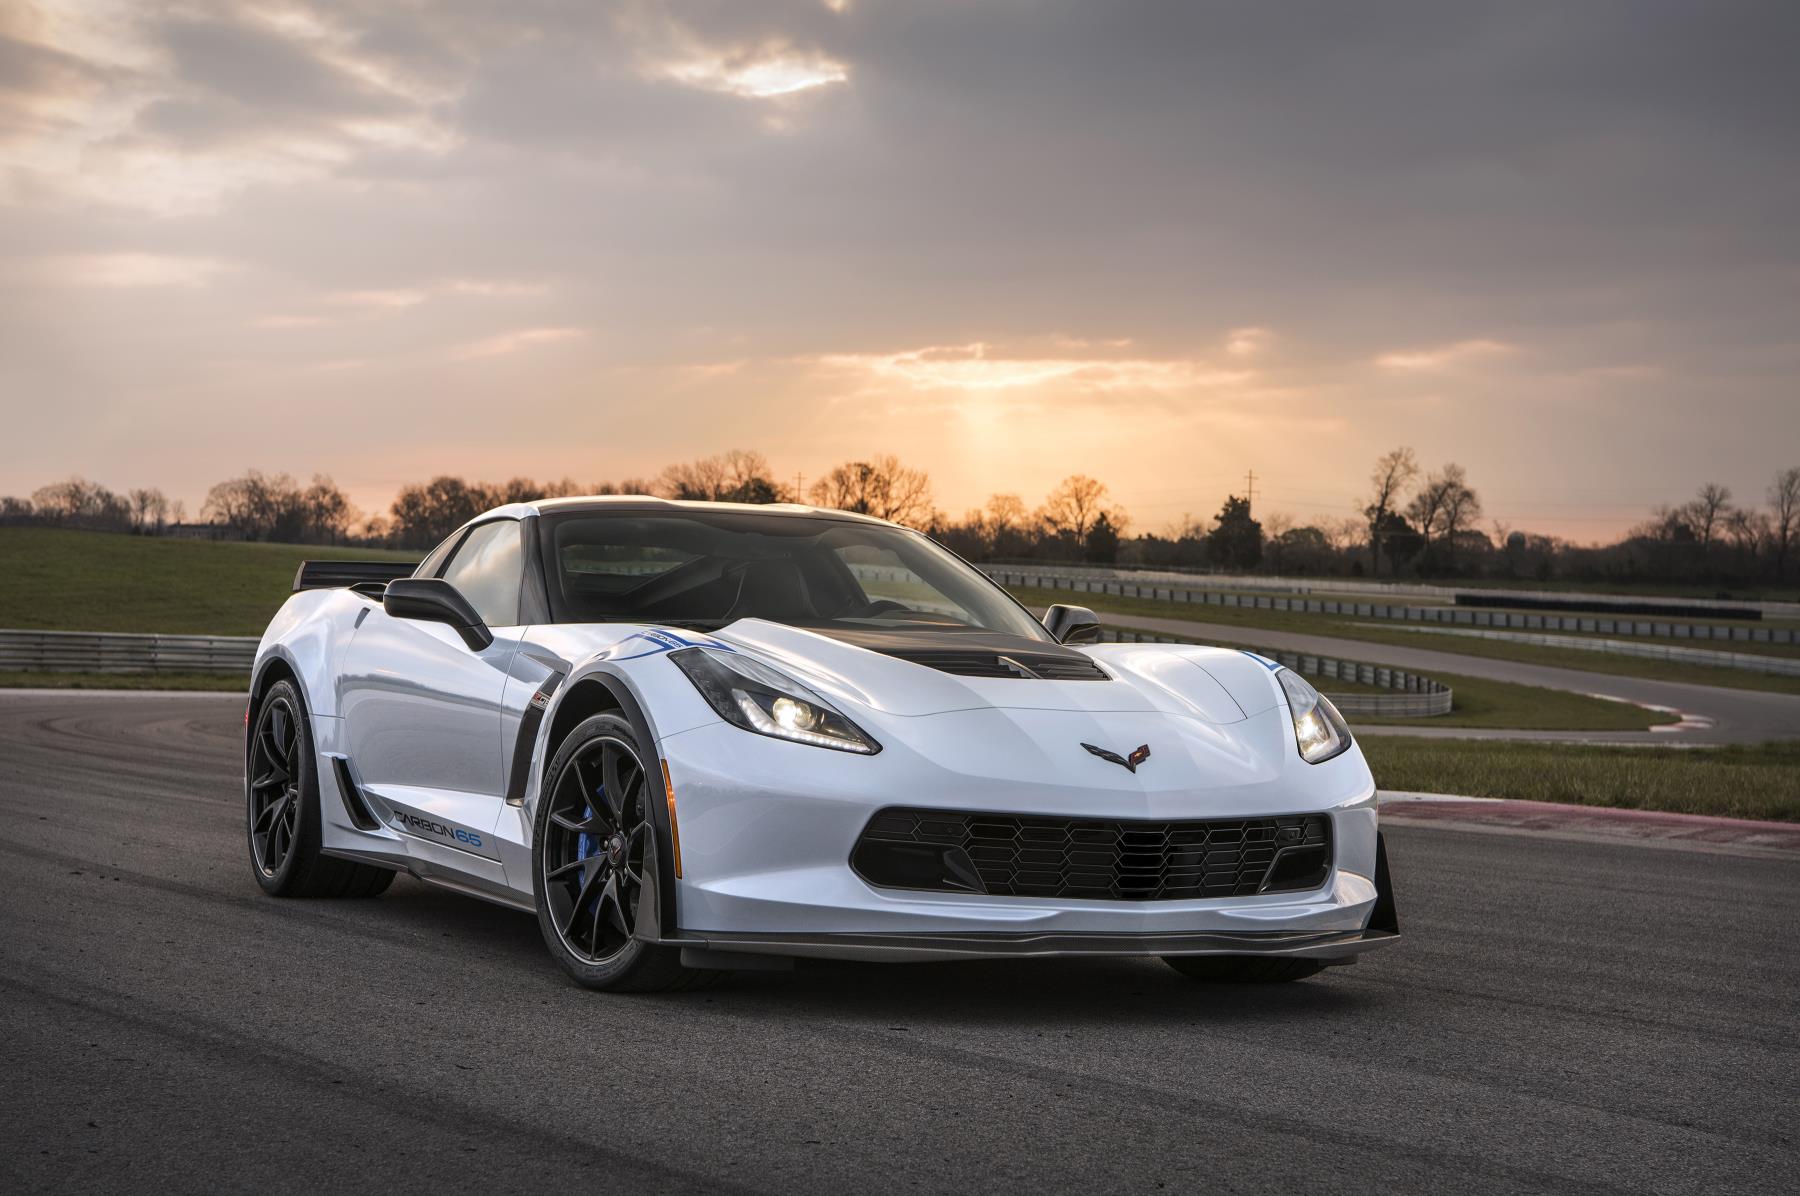 Made in America Auto Index says Corvette is the most American car.